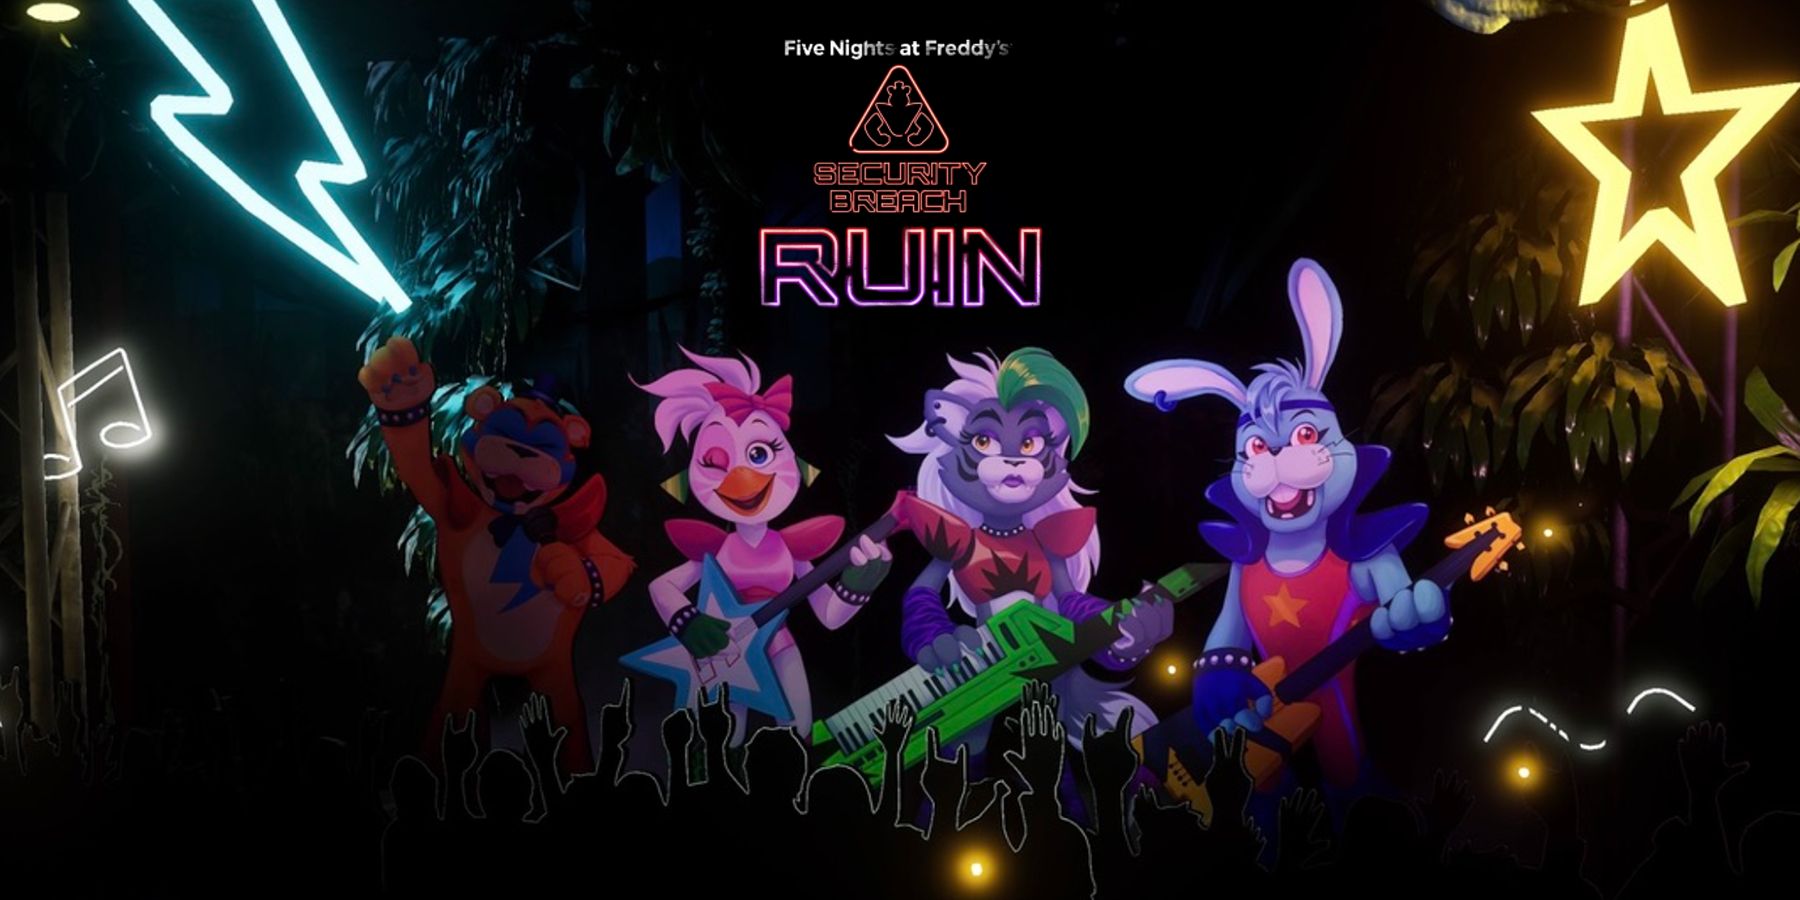 How Five Nights at Freddy's RUIN Finally Establishes the Series' Canon